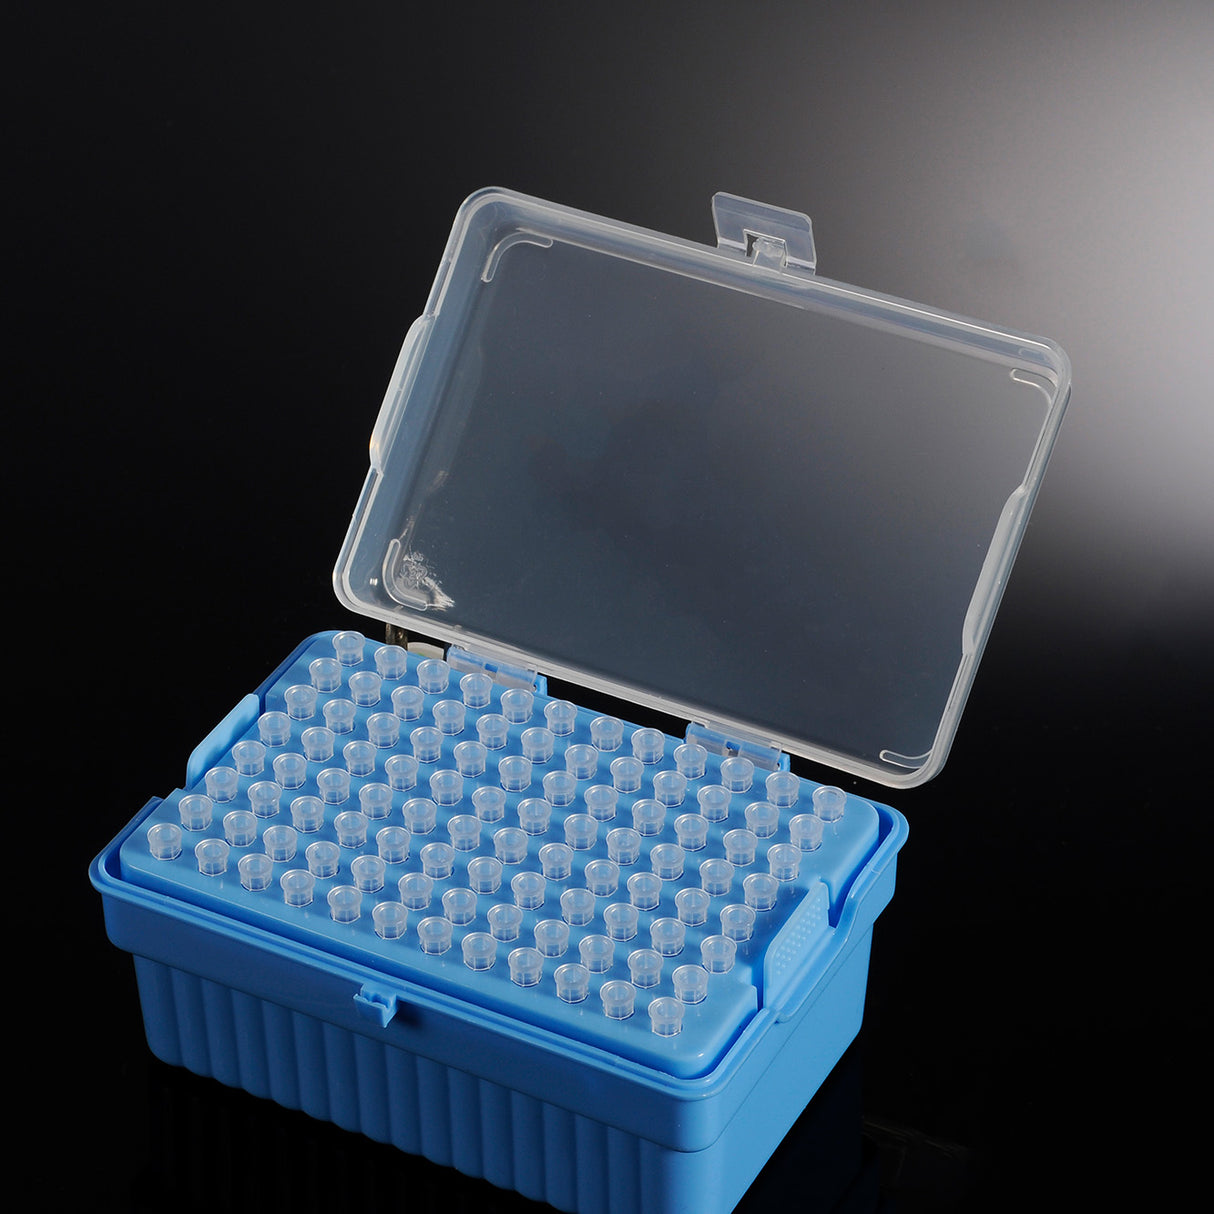 LaboQuip Pipette Tips 10 μl, Universal, Sterile, Extra Long, DNase& RNase Free, Clear, Graduated (Rack of 96 Tips)